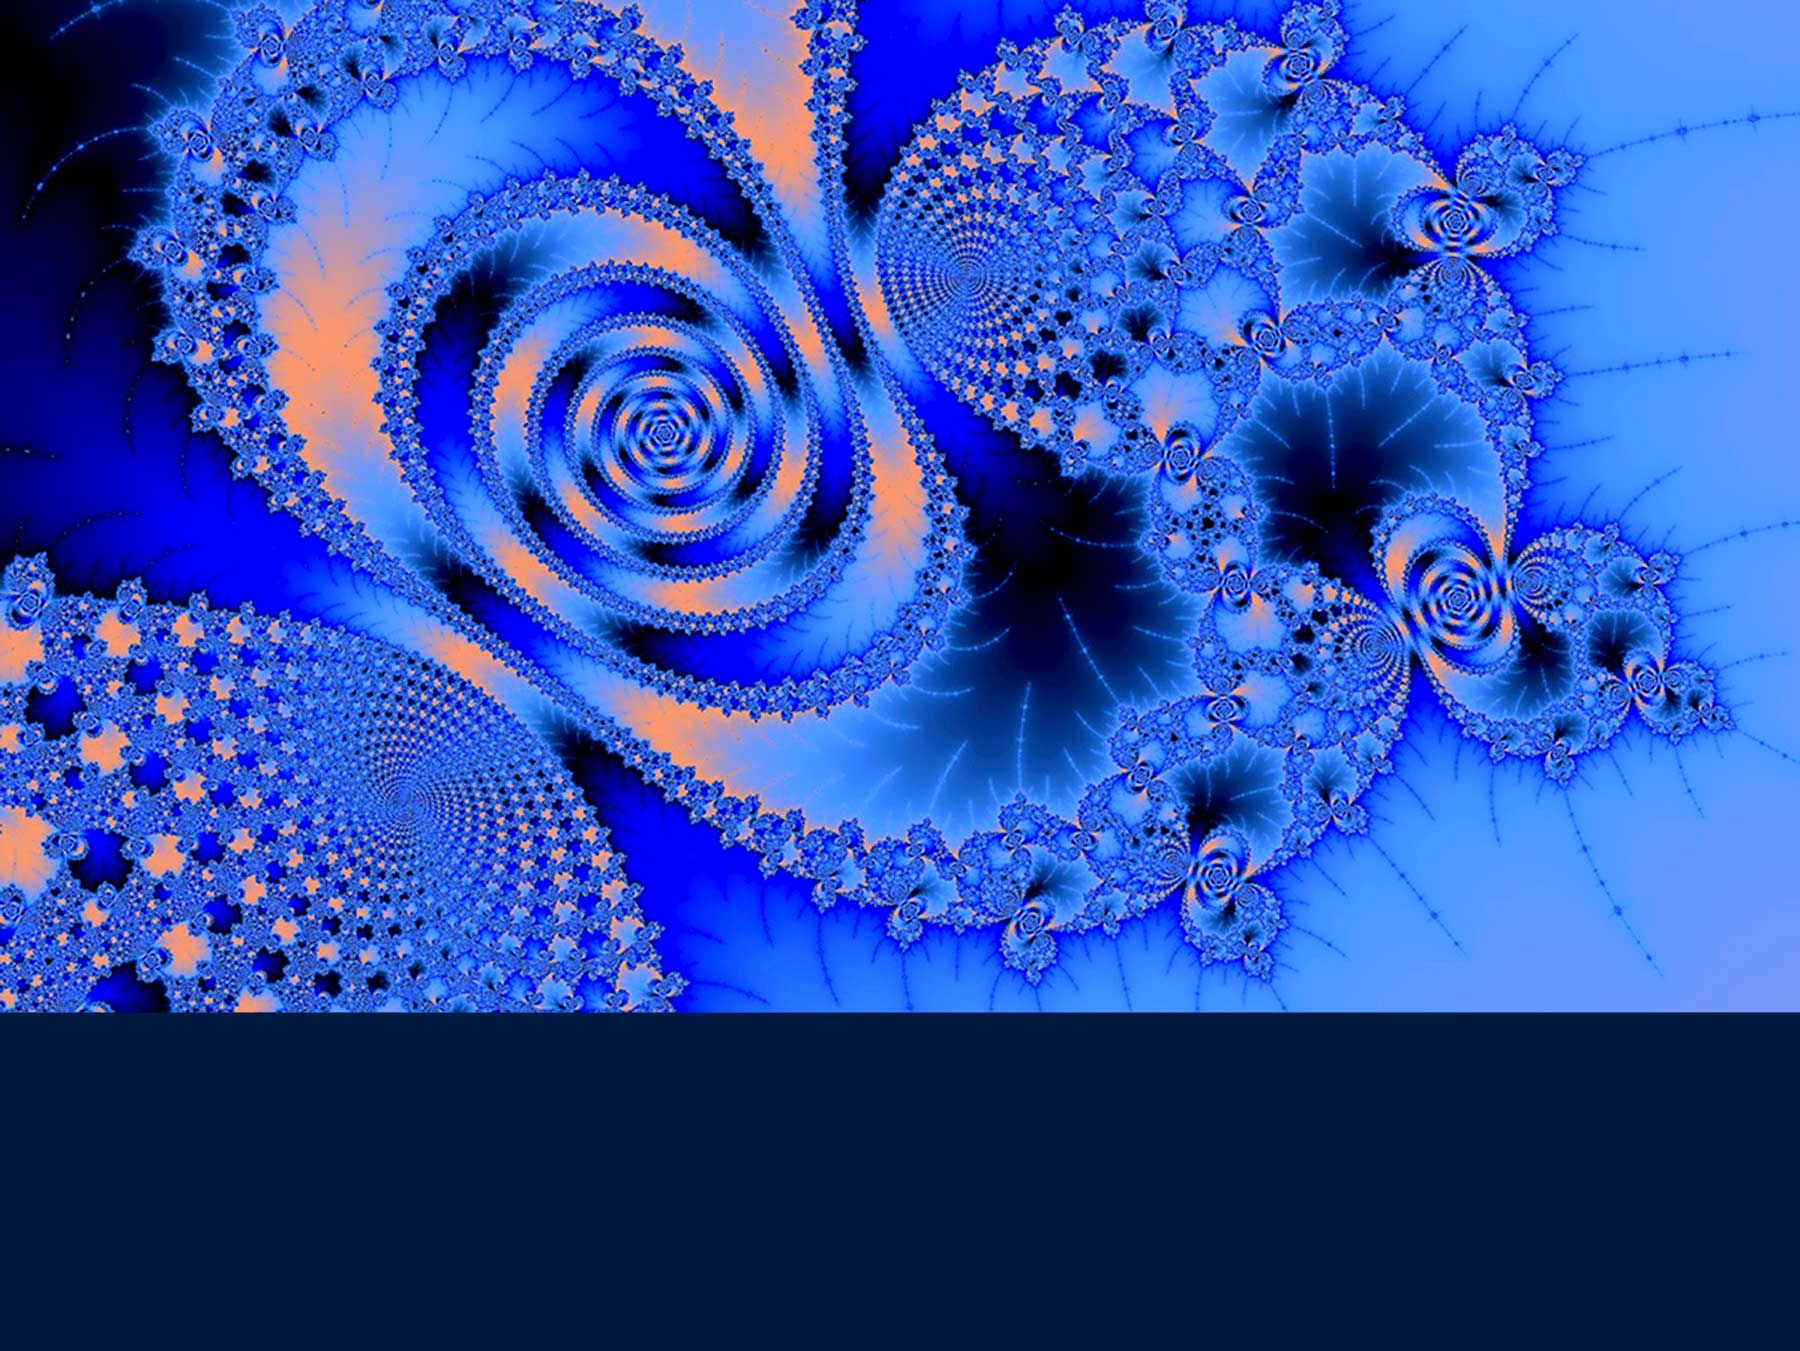 Classical chaos – or the butterfly effect – produces fractal patterns like the one shown. Classical chaos’s cousin – quantum information scrambling – encompasses even more exotic mechanisms such as quasiparticles hopping between molecules, which can dissipate energy.  Stock image via Storyblocks